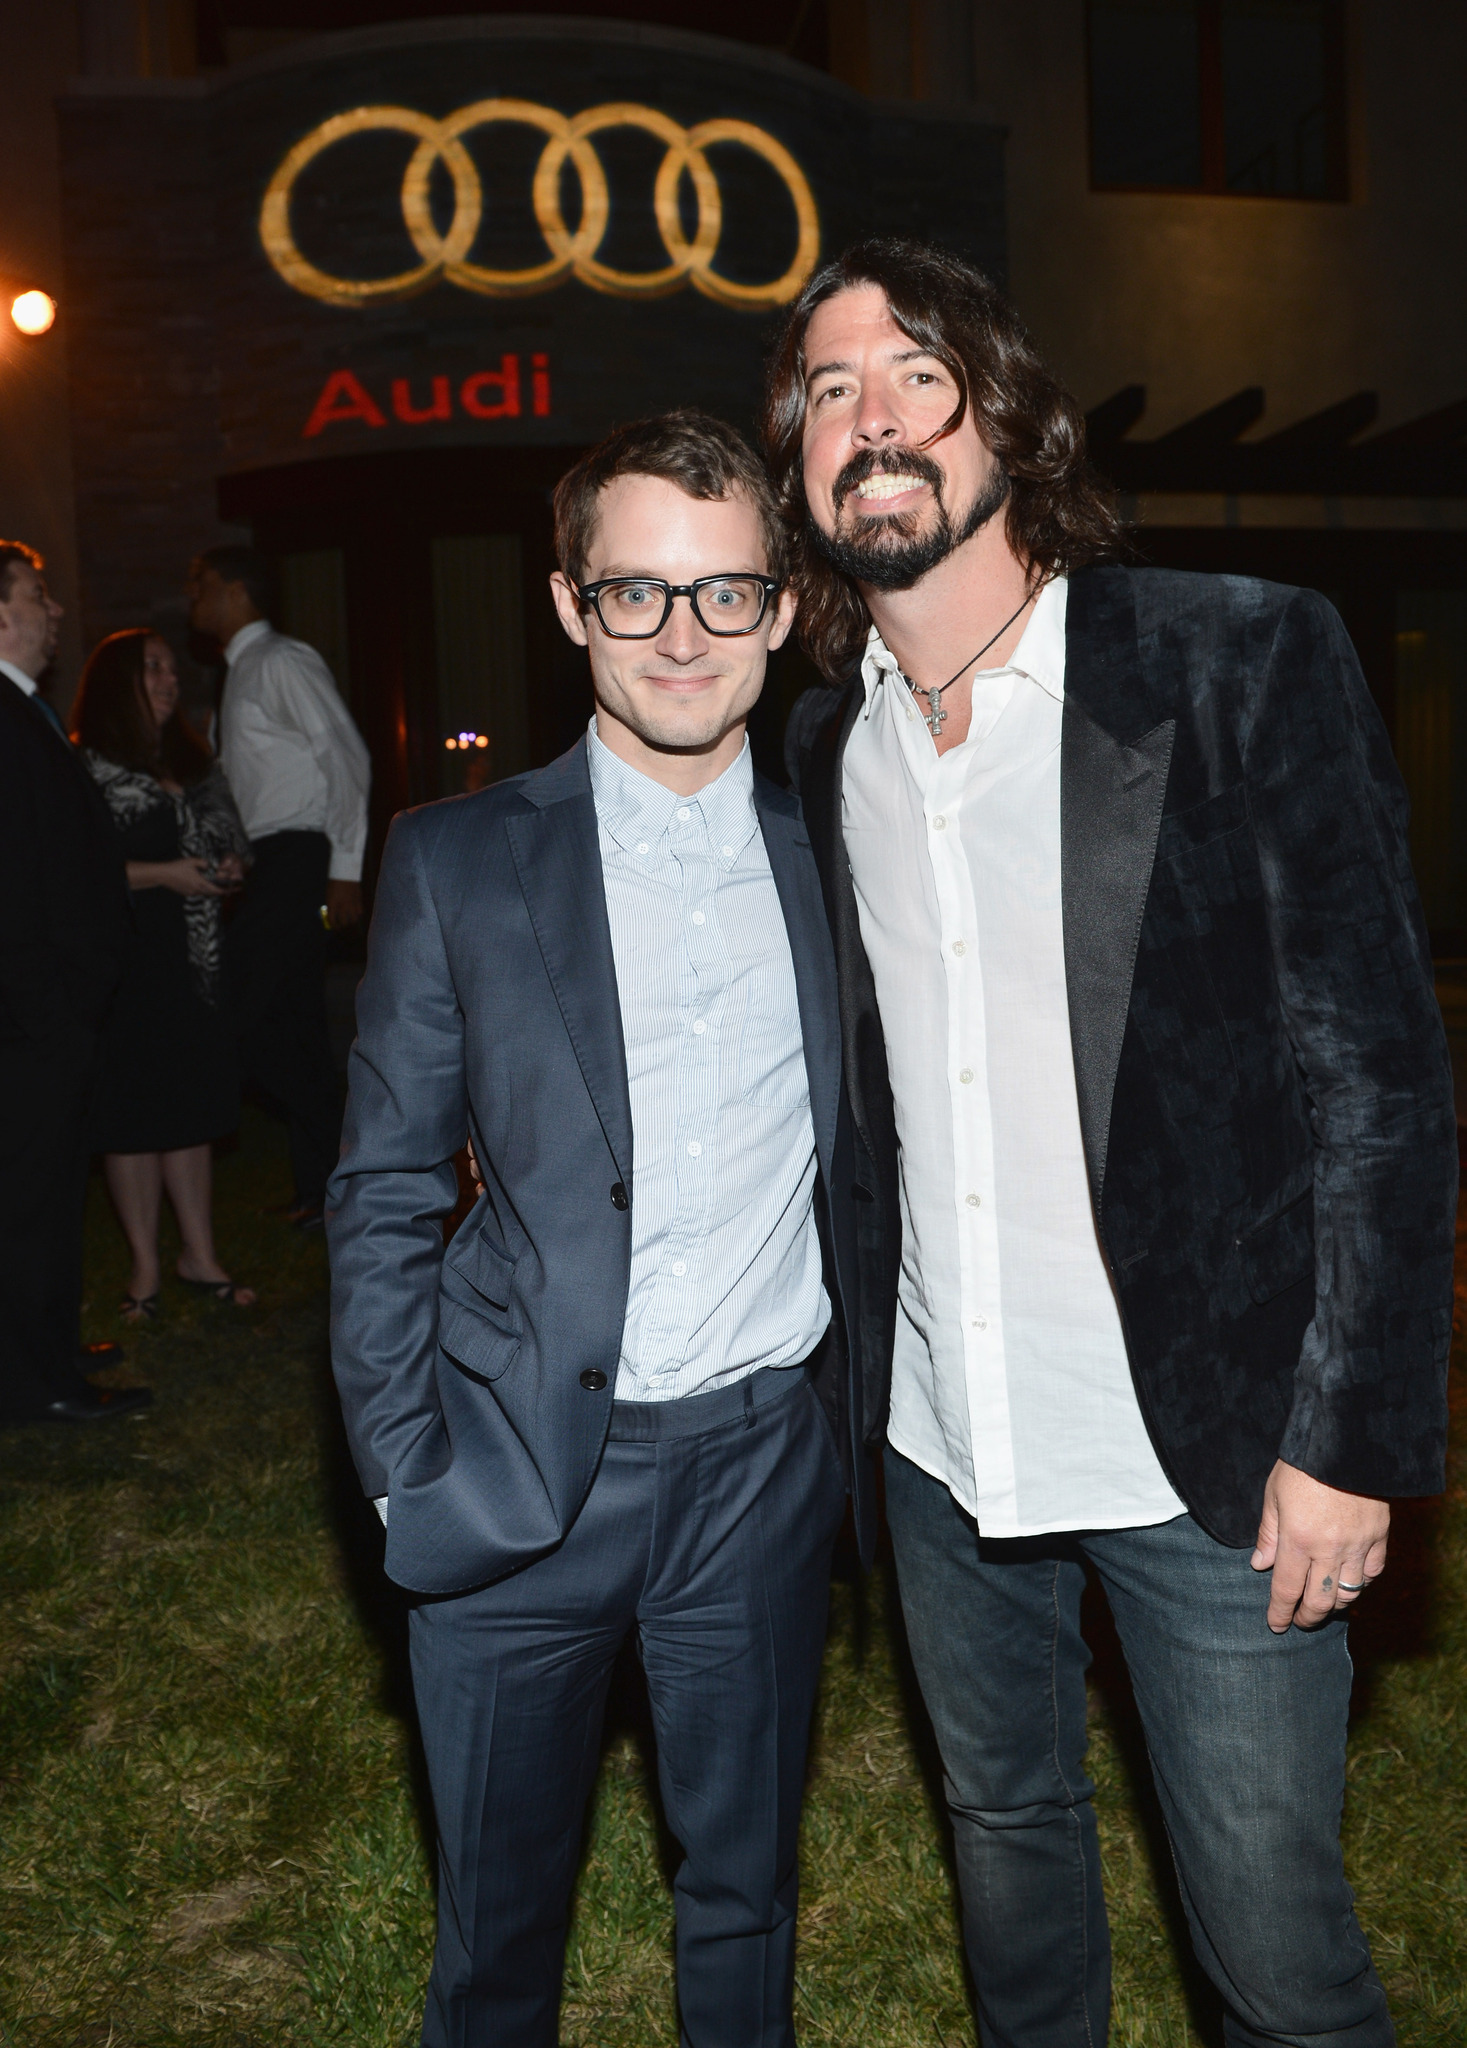 Elijah Wood and Dave Grohl